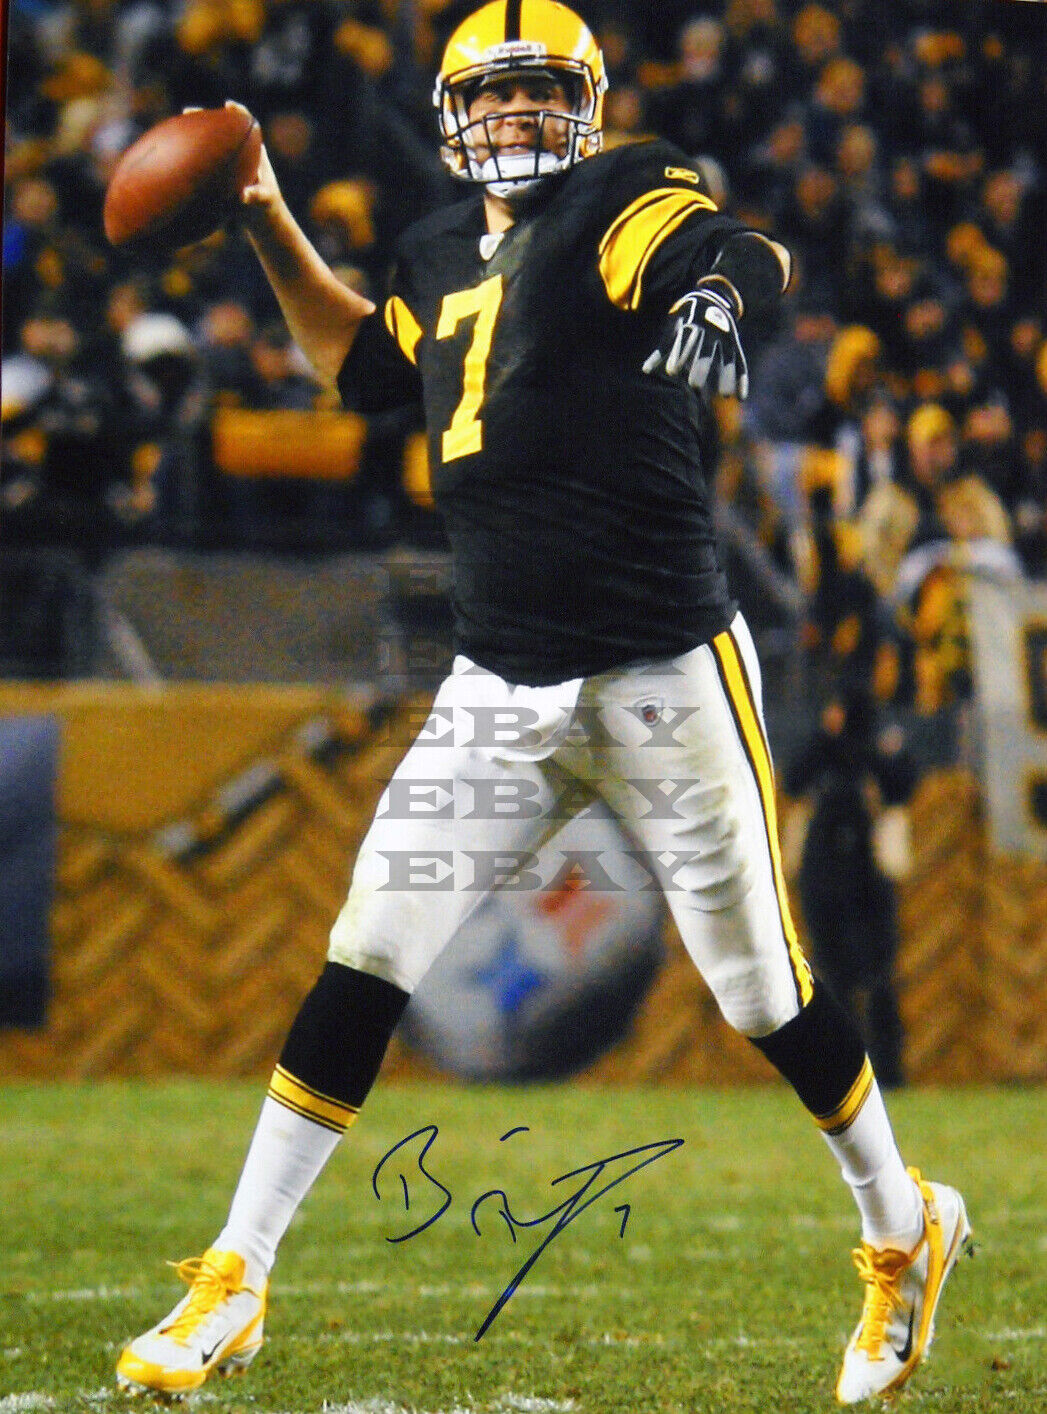 BEN ROETHLISBERGER Pittsburg Steelers Signed Autographed 8x10 Photo Poster painting Reprint